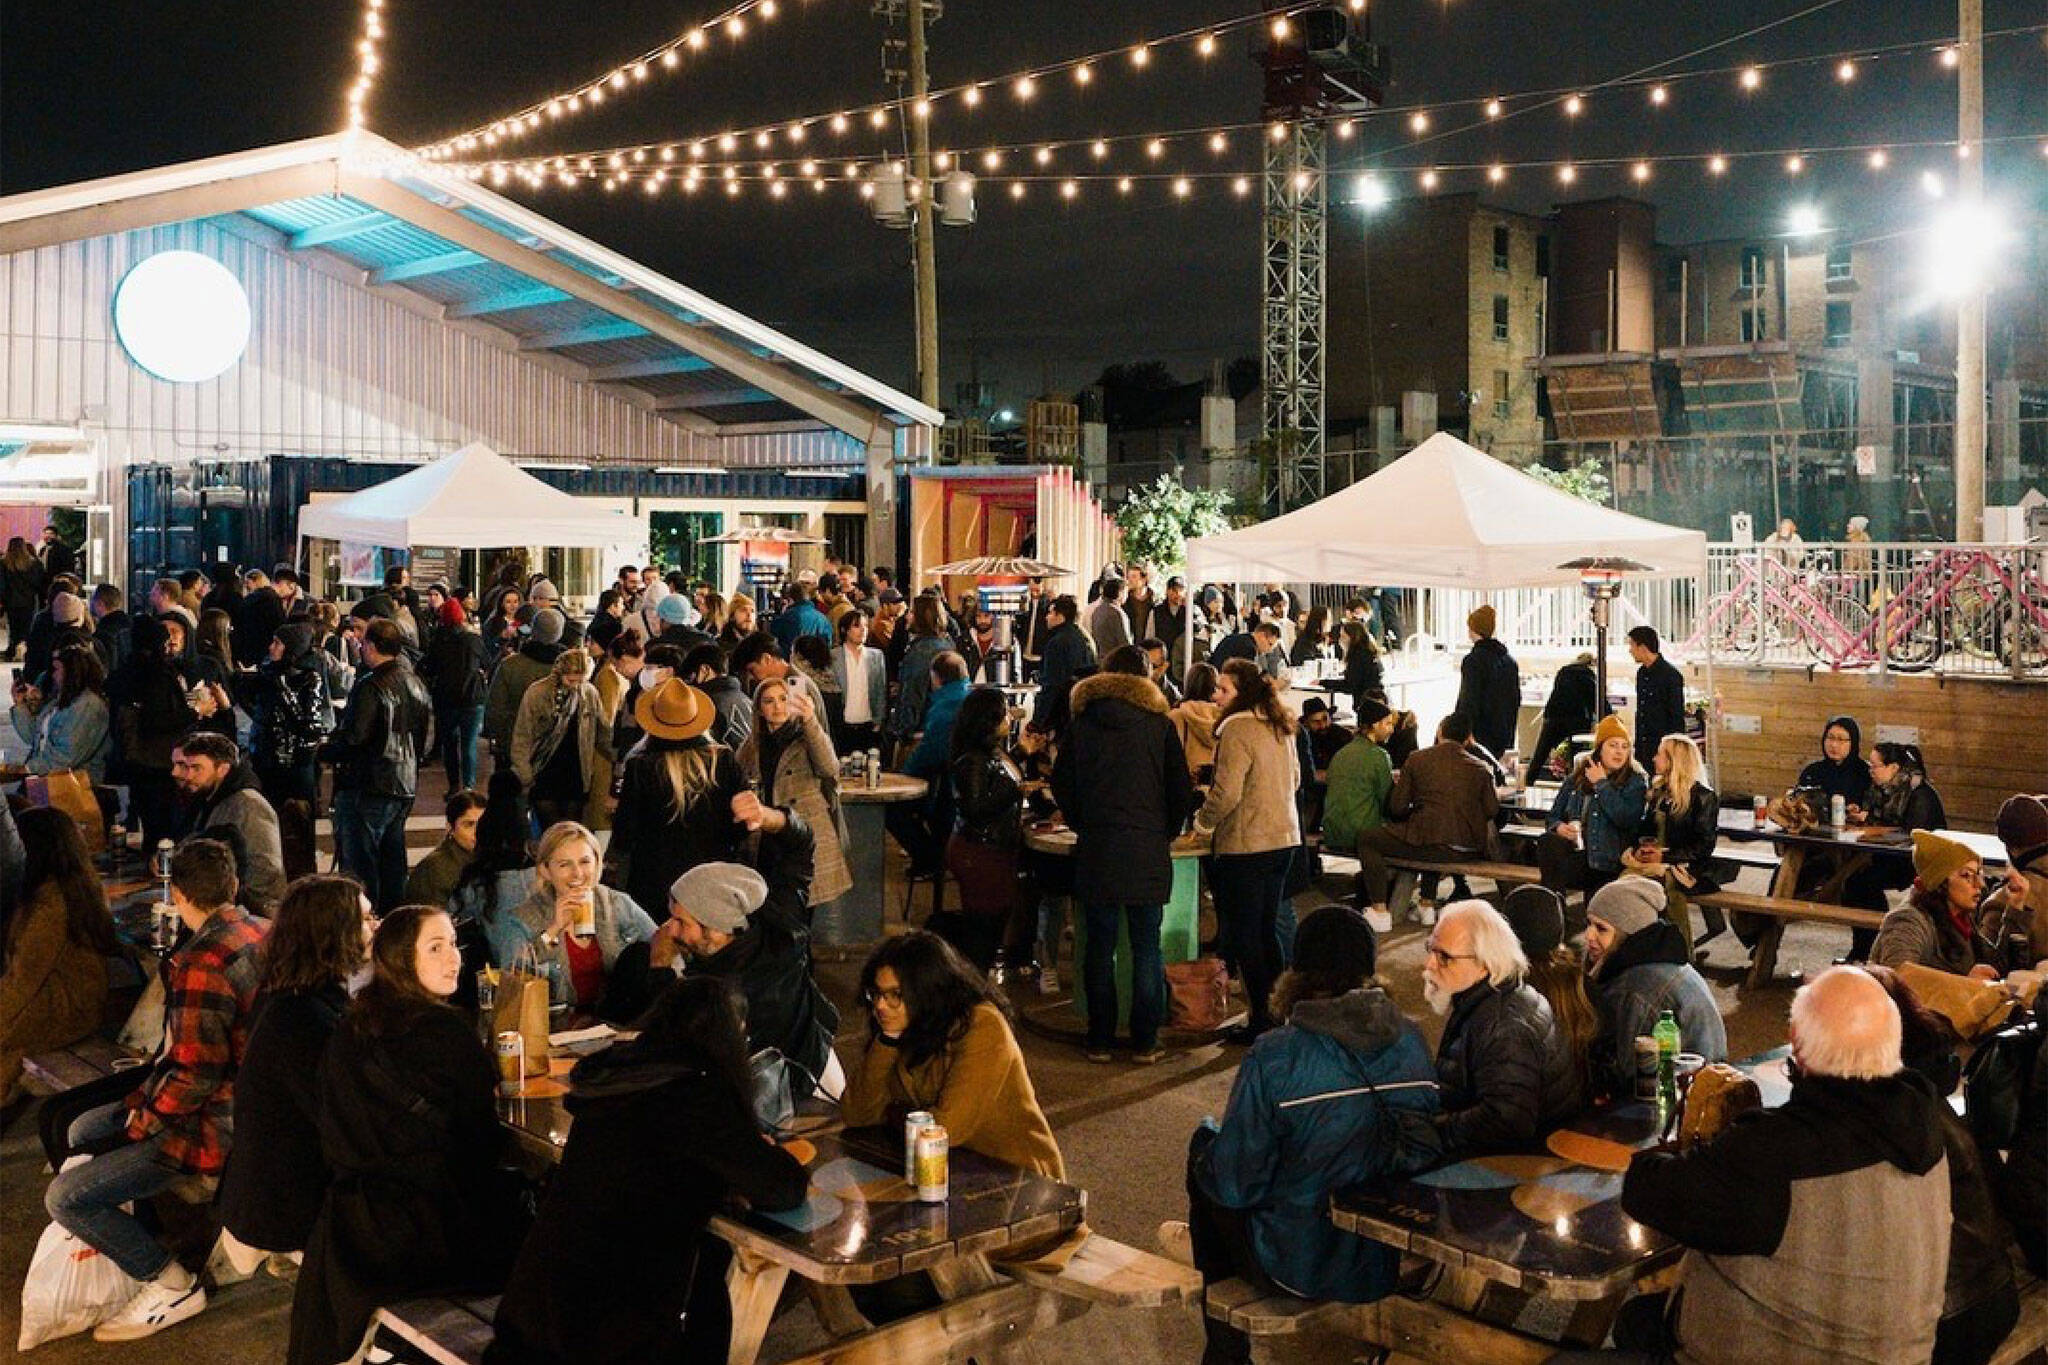 Toronto's stackt market is getting a 10 day festival next month